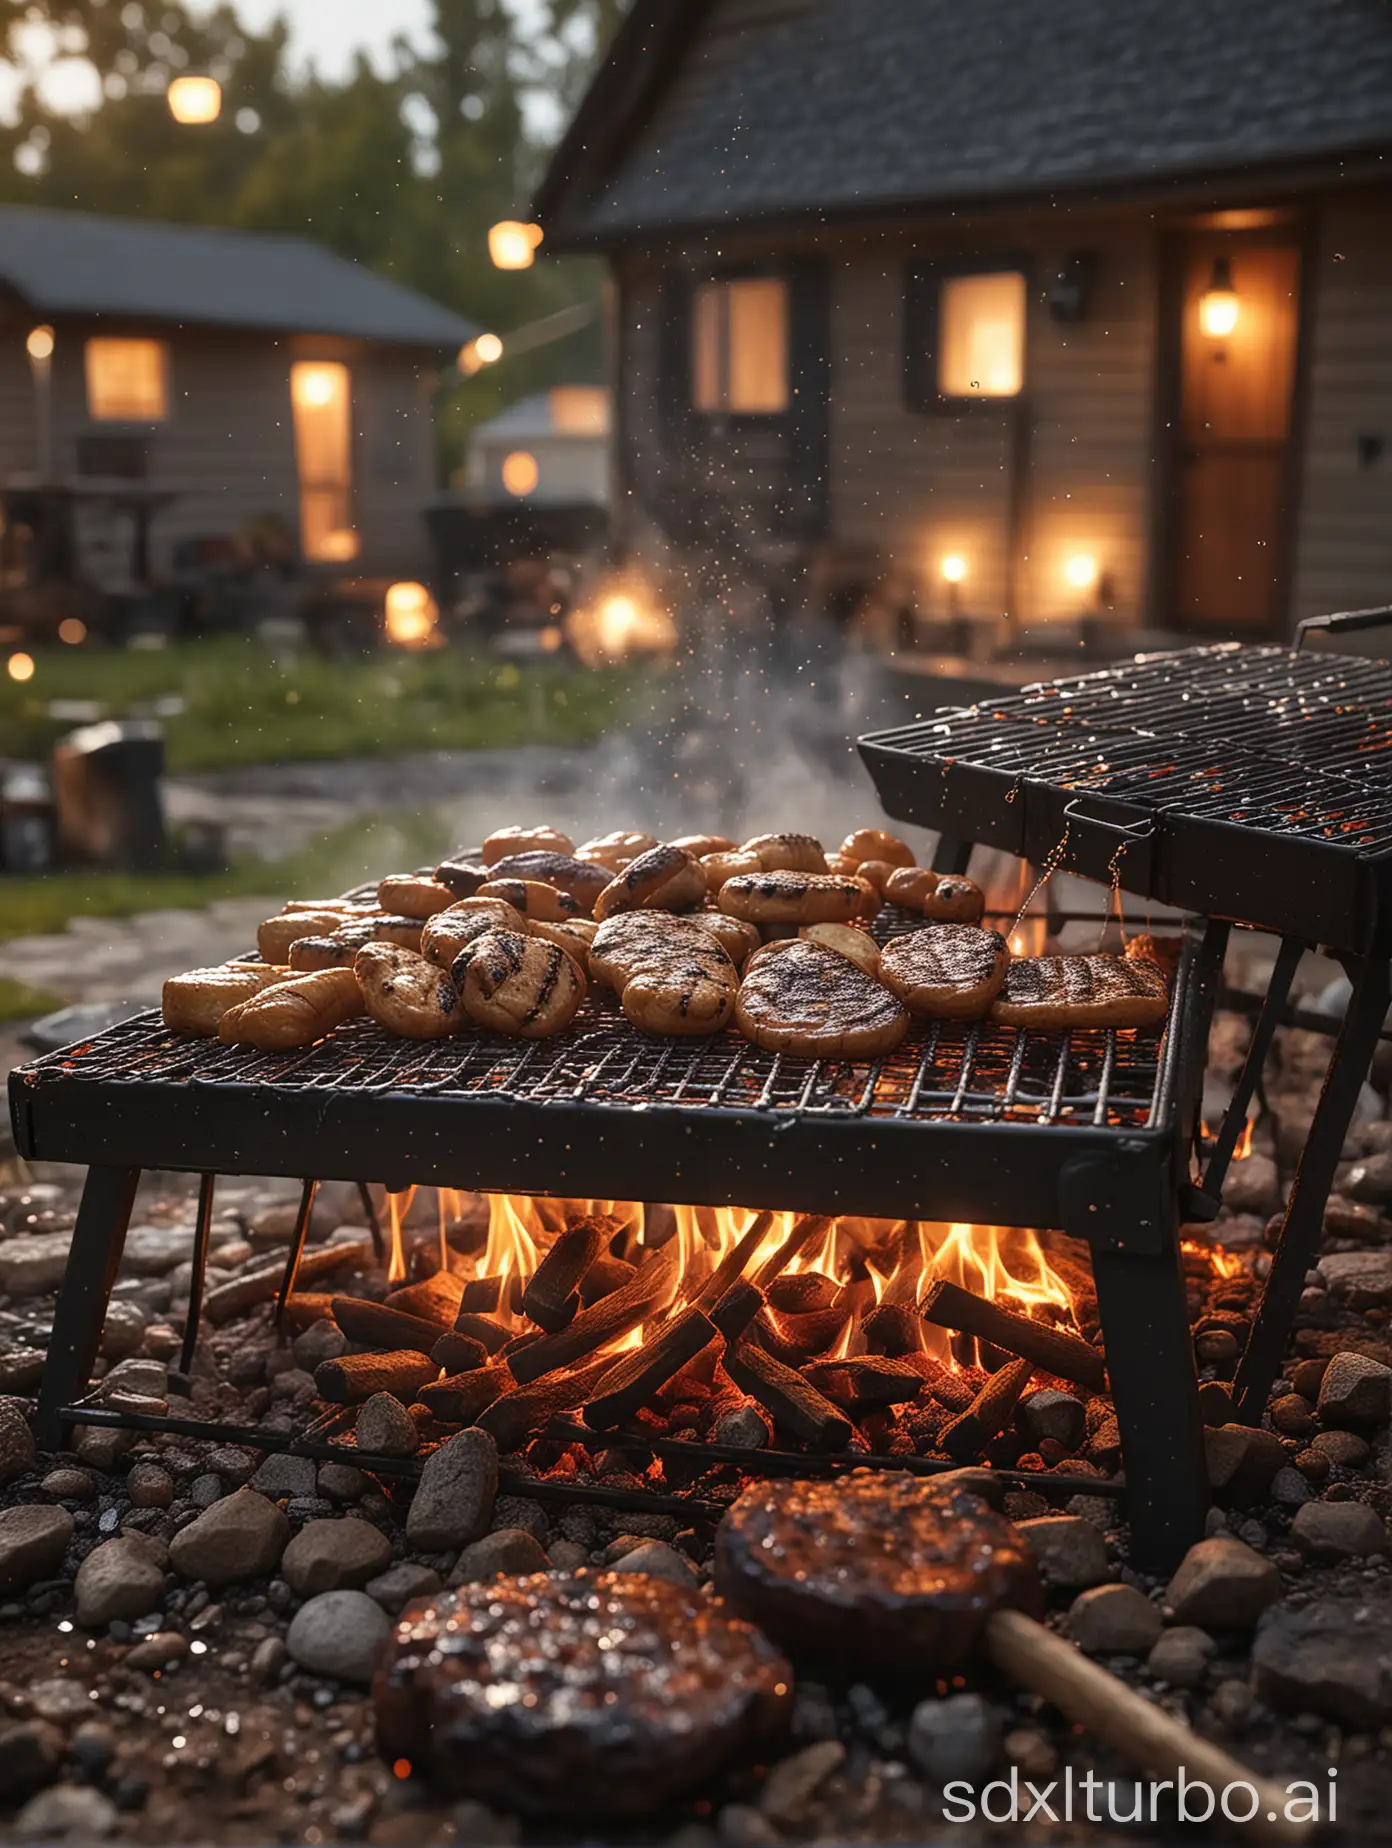 Backyard barbecue grill captured in hyper-realistic photography, moisture-laden, droplets clinging to the camera lens enhancing the visual texture, dramatic lighting casting sharp contrasts over the scene, ultra clear image quality, evening ambiance, soft glow of embers, smoke wisps rising, foreground focus, bokeh background with hints of a cozy house, high dynamic range, octane rendering.